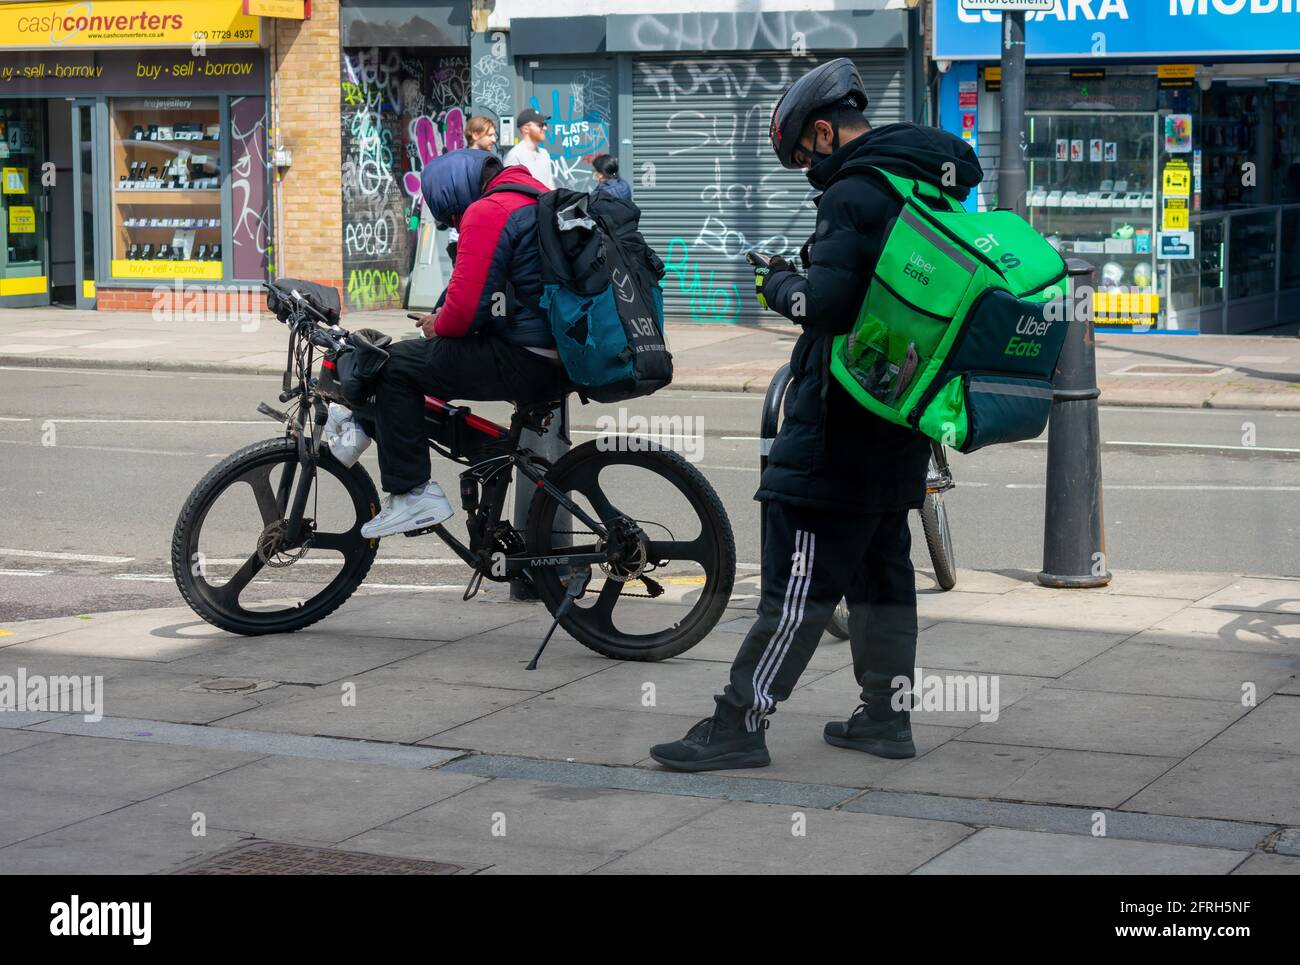 London. UK- 05.18.2021: young men working as self employed riders for online food ordering companies waiting for their next job notice. Stock Photo